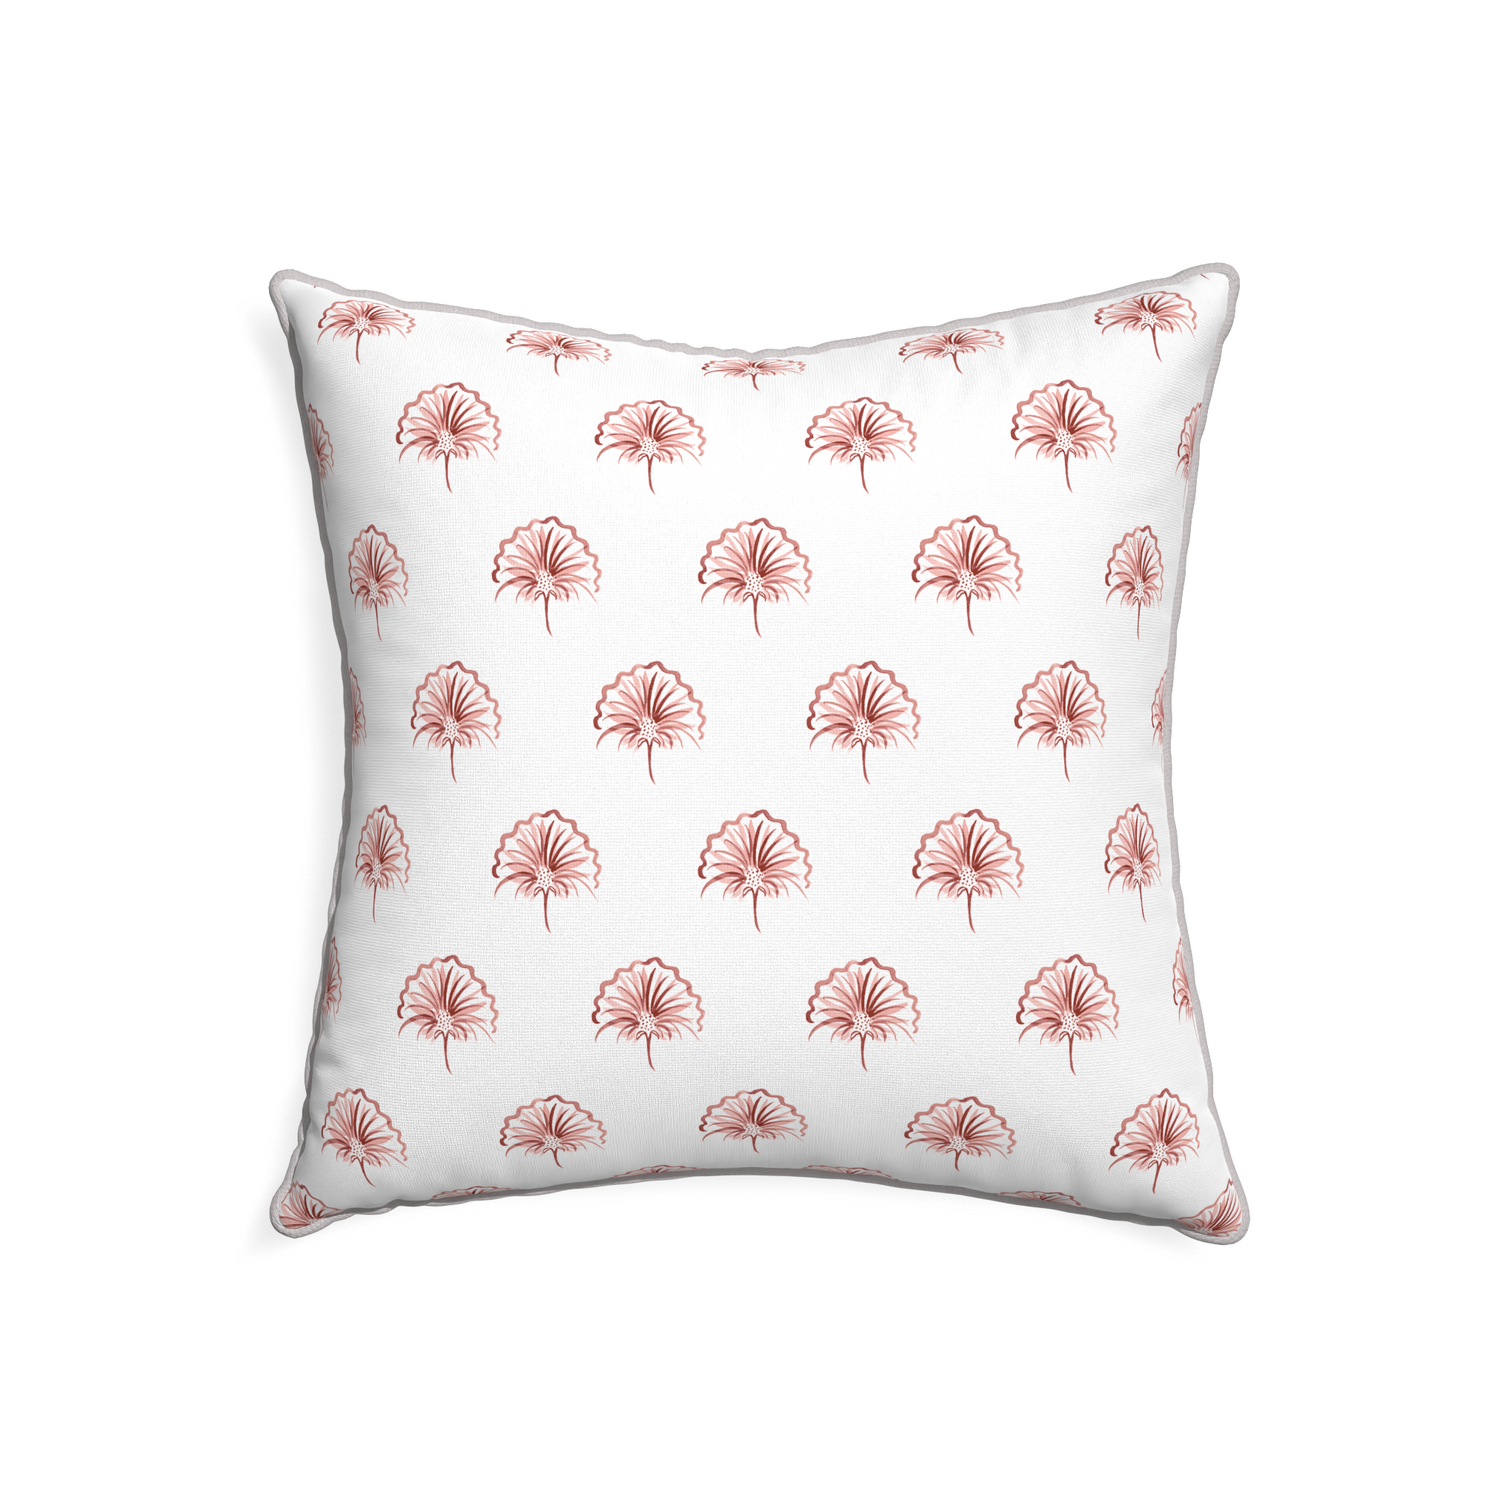 22-square penelope rose custom floral pinkpillow with pebble piping on white background